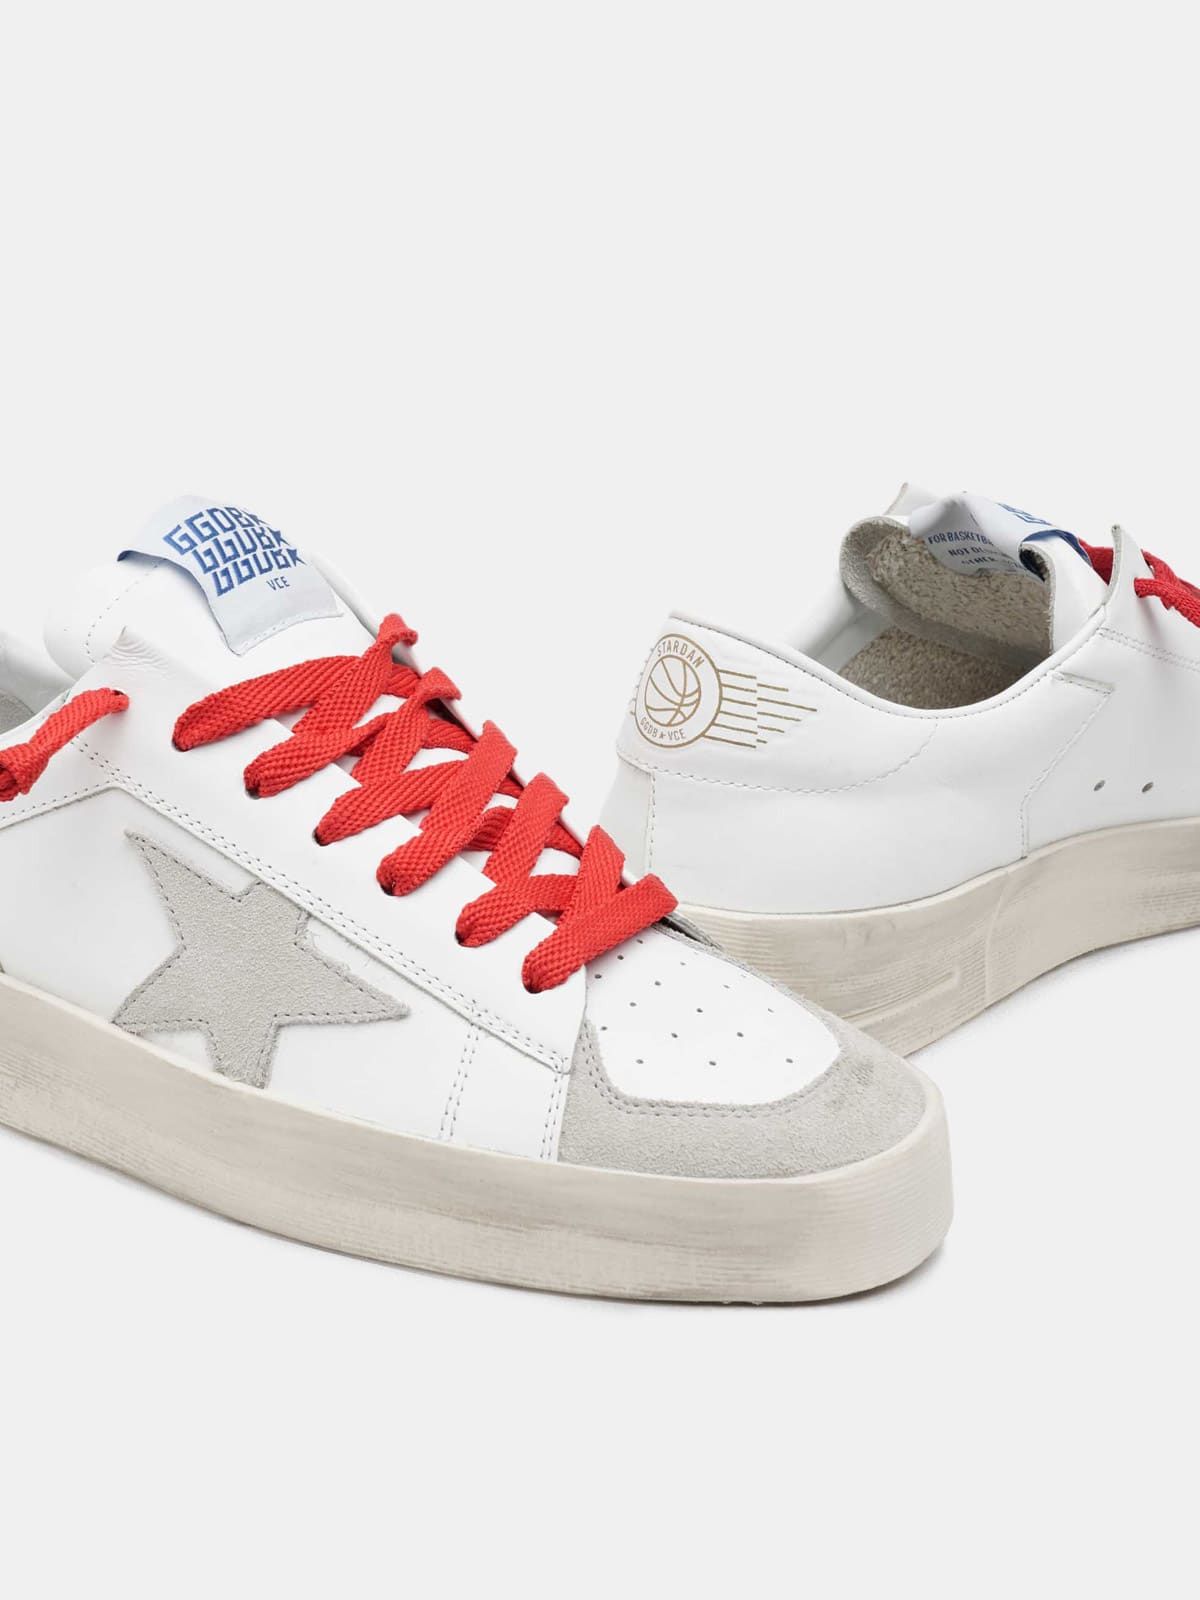 Stardan Sneakers in total white leather with suede inserts and contrasting  red laces | Golden Goose